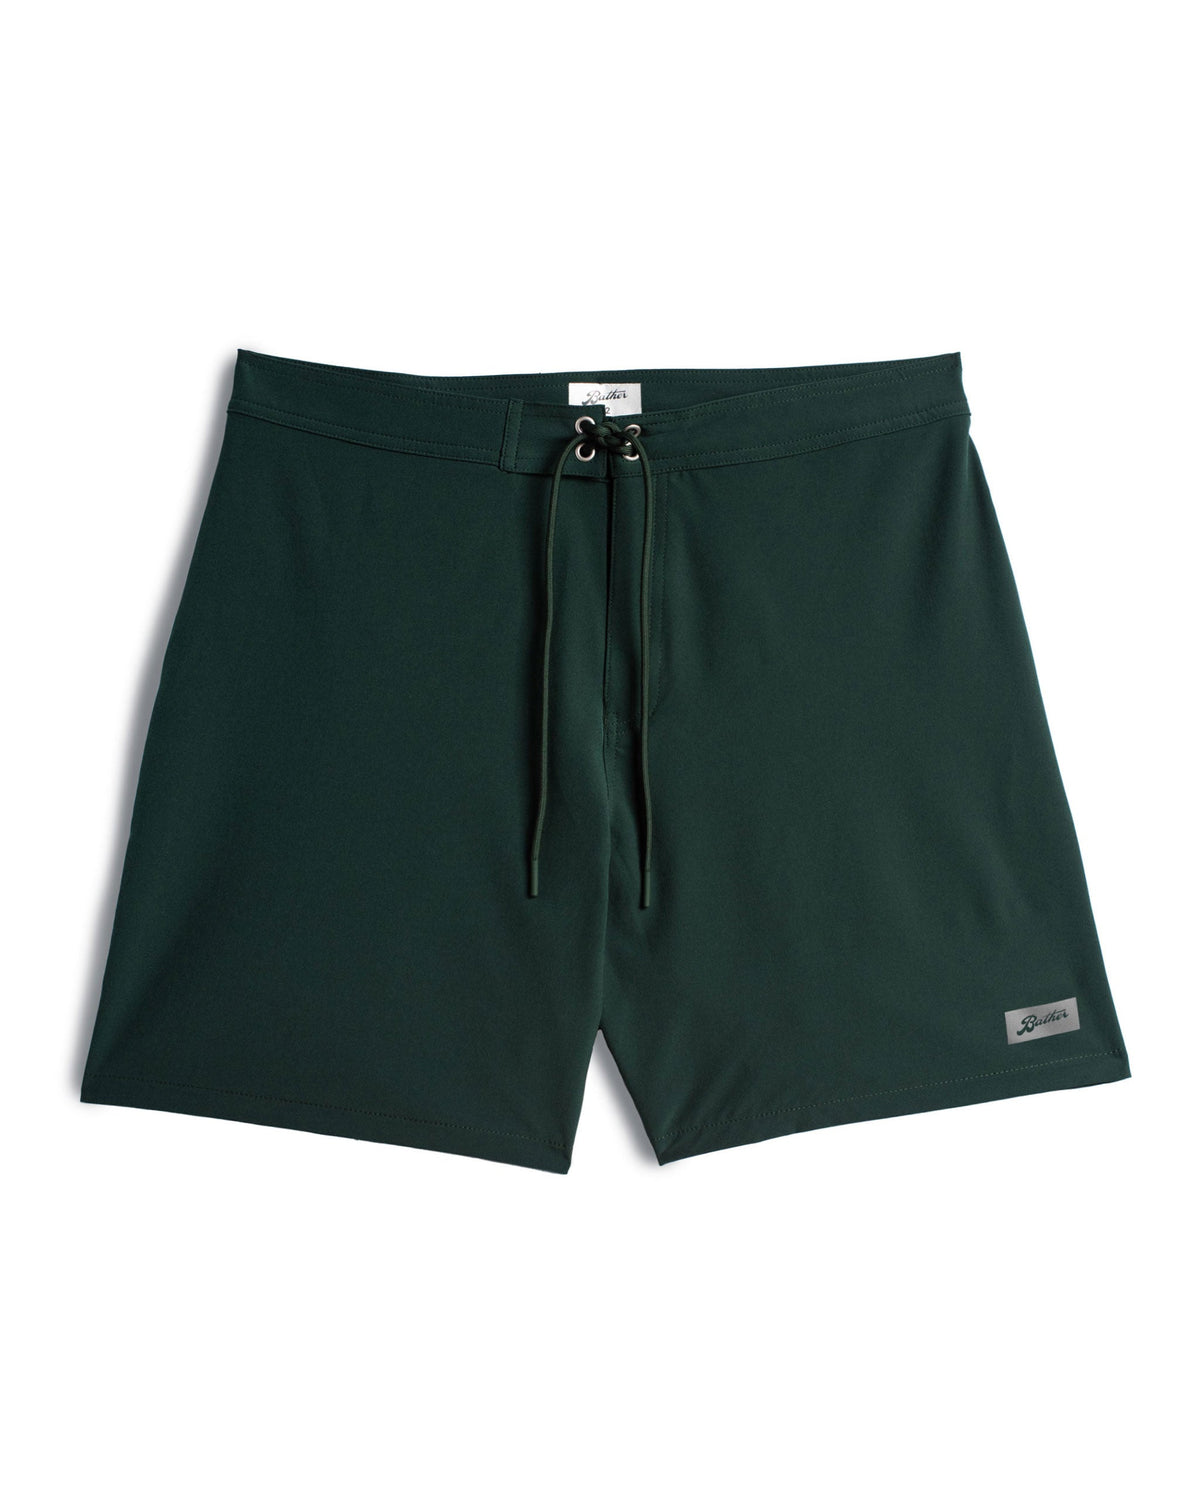 Technical Surf Trunk– Bather